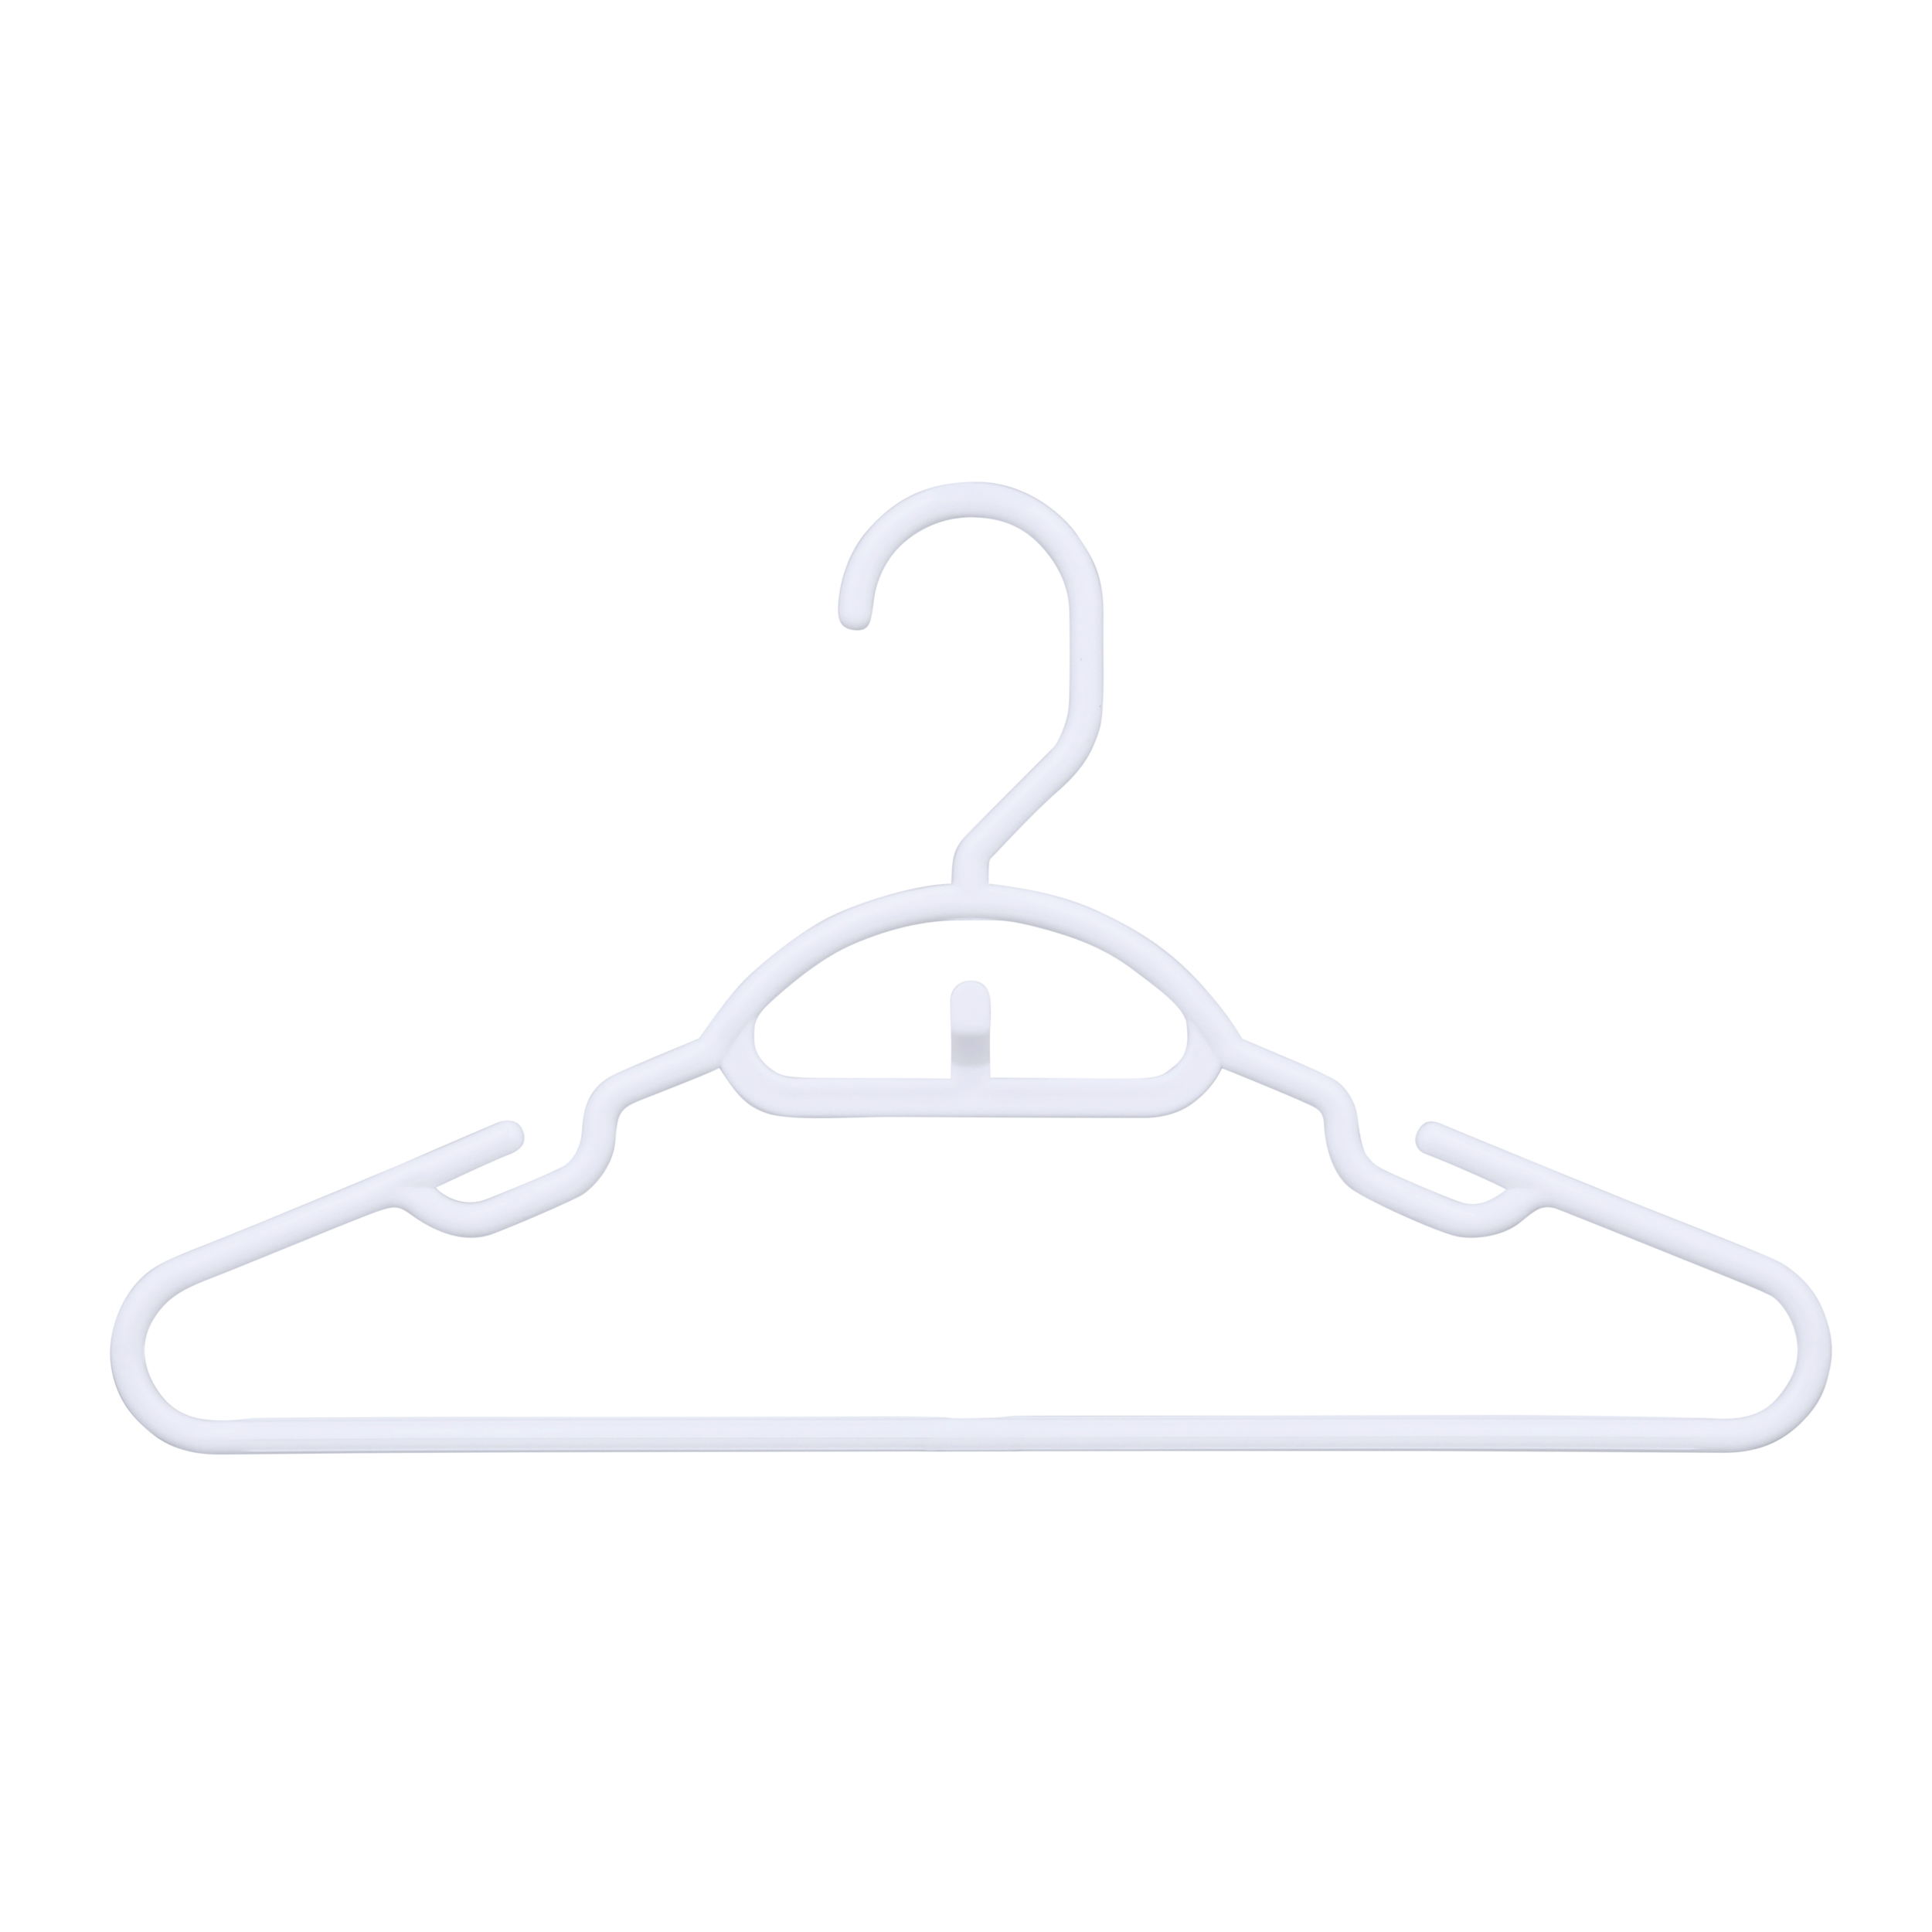 closetselect 30 Pk Youth Petite Plastic Hangers for Children Clothes Sizes 8 to 14, Petite, Teen, Preteen, Junior, 30 Pack (White)